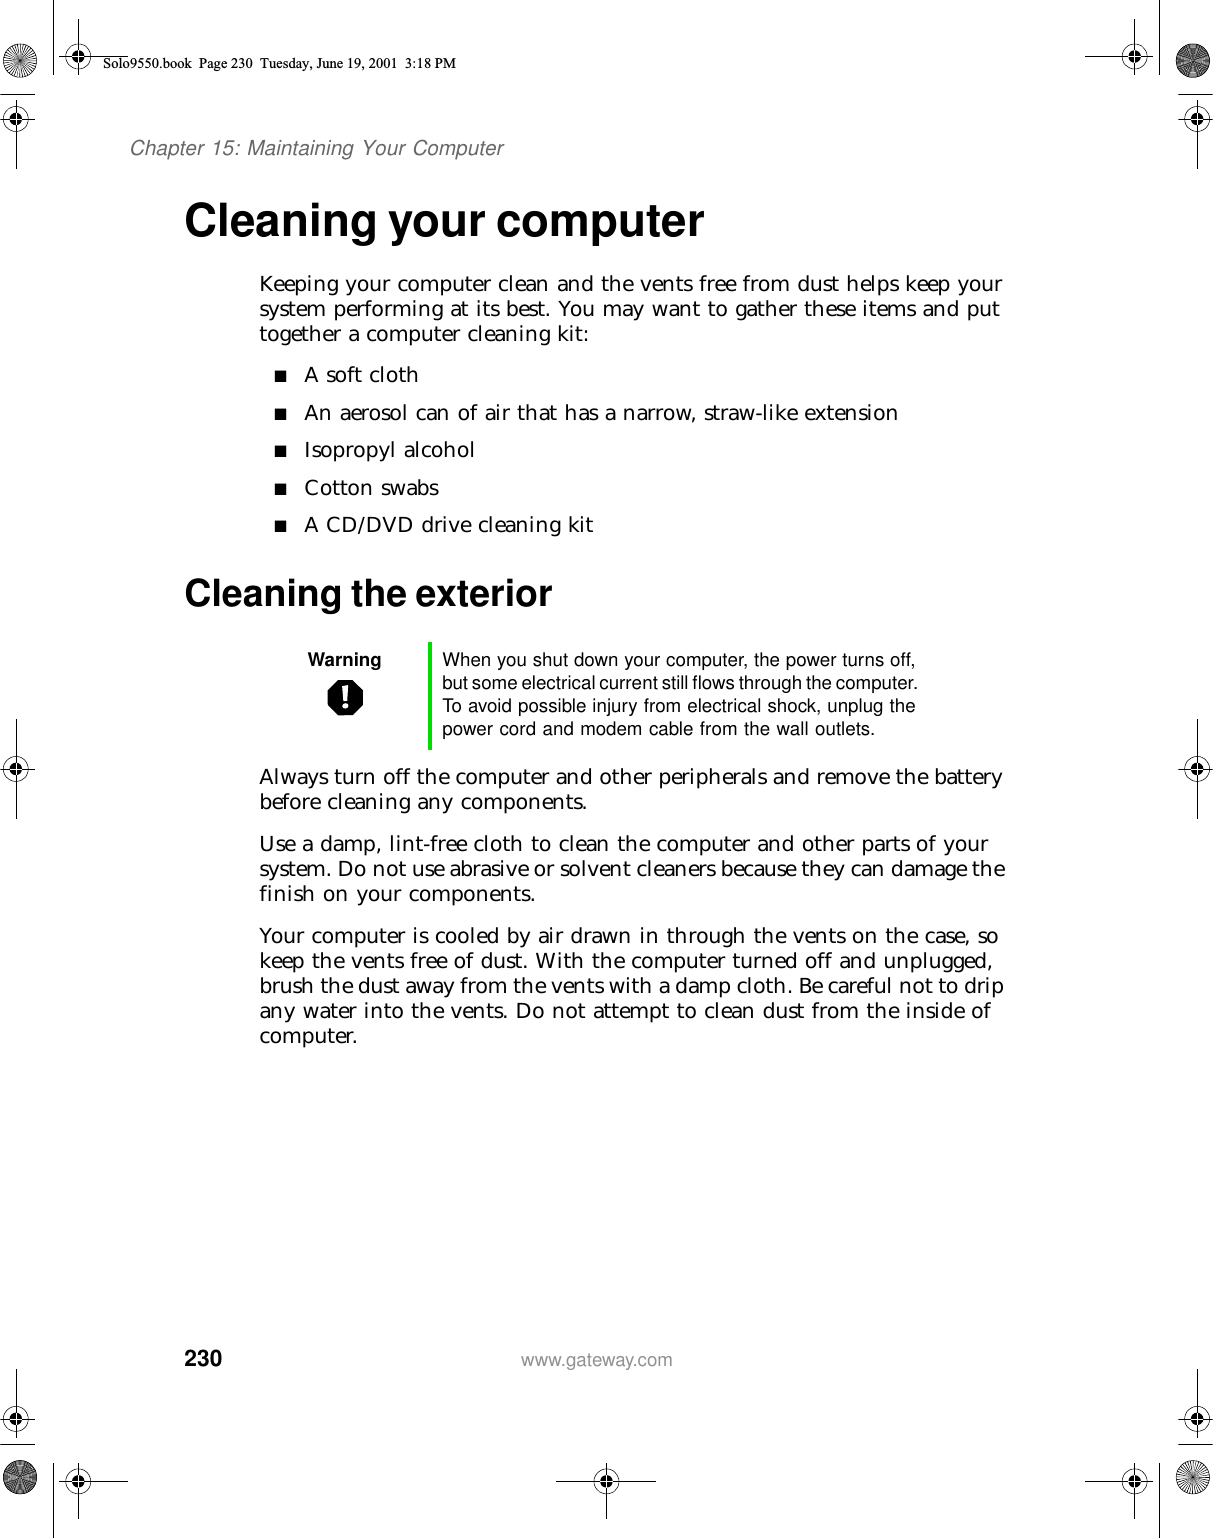 230Chapter 15: Maintaining Your Computerwww.gateway.comCleaning your computerKeeping your computer clean and the vents free from dust helps keep your system performing at its best. You may want to gather these items and put together a computer cleaning kit:■A soft cloth■An aerosol can of air that has a narrow, straw-like extension■Isopropyl alcohol■Cotton swabs■A CD/DVD drive cleaning kitCleaning the exteriorAlways turn off the computer and other peripherals and remove the battery before cleaning any components.Use a damp, lint-free cloth to clean the computer and other parts of your system. Do not use abrasive or solvent cleaners because they can damage the finish on your components.Your computer is cooled by air drawn in through the vents on the case, so keep the vents free of dust. With the computer turned off and unplugged, brush the dust away from the vents with a damp cloth. Be careful not to drip any water into the vents. Do not attempt to clean dust from the inside of computer.Warning When you shut down your computer, the power turns off, but some electrical current still flows through the computer. To avoid possible injury from electrical shock, unplug the power cord and modem cable from the wall outlets.Solo9550.book Page 230 Tuesday, June 19, 2001 3:18 PM